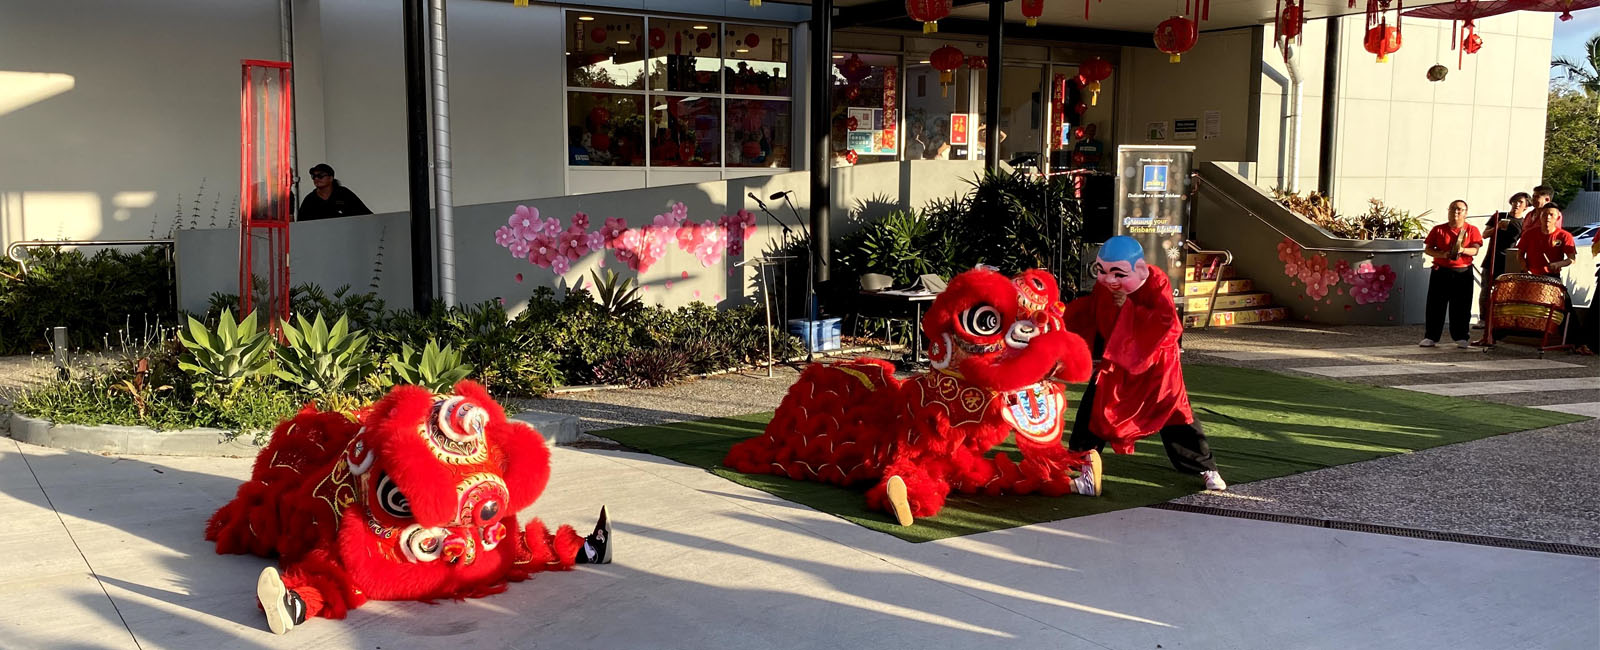 two chinese lion dancers crouch on the ground while a person dressed as buddha dances over them